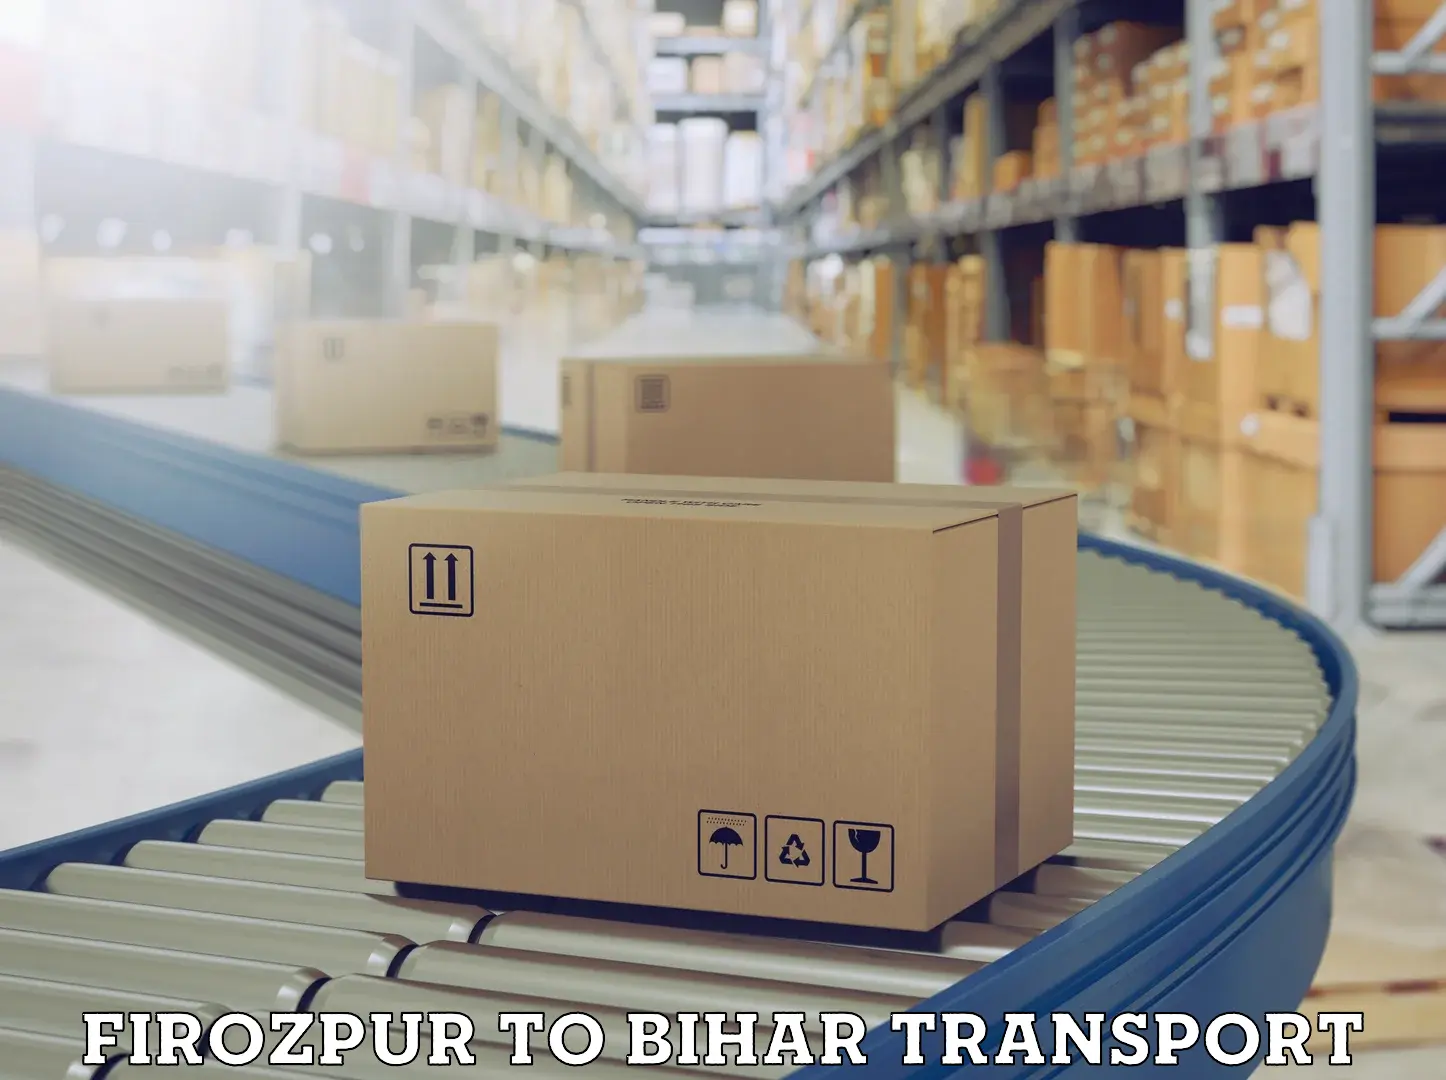 Lorry transport service Firozpur to Baisi